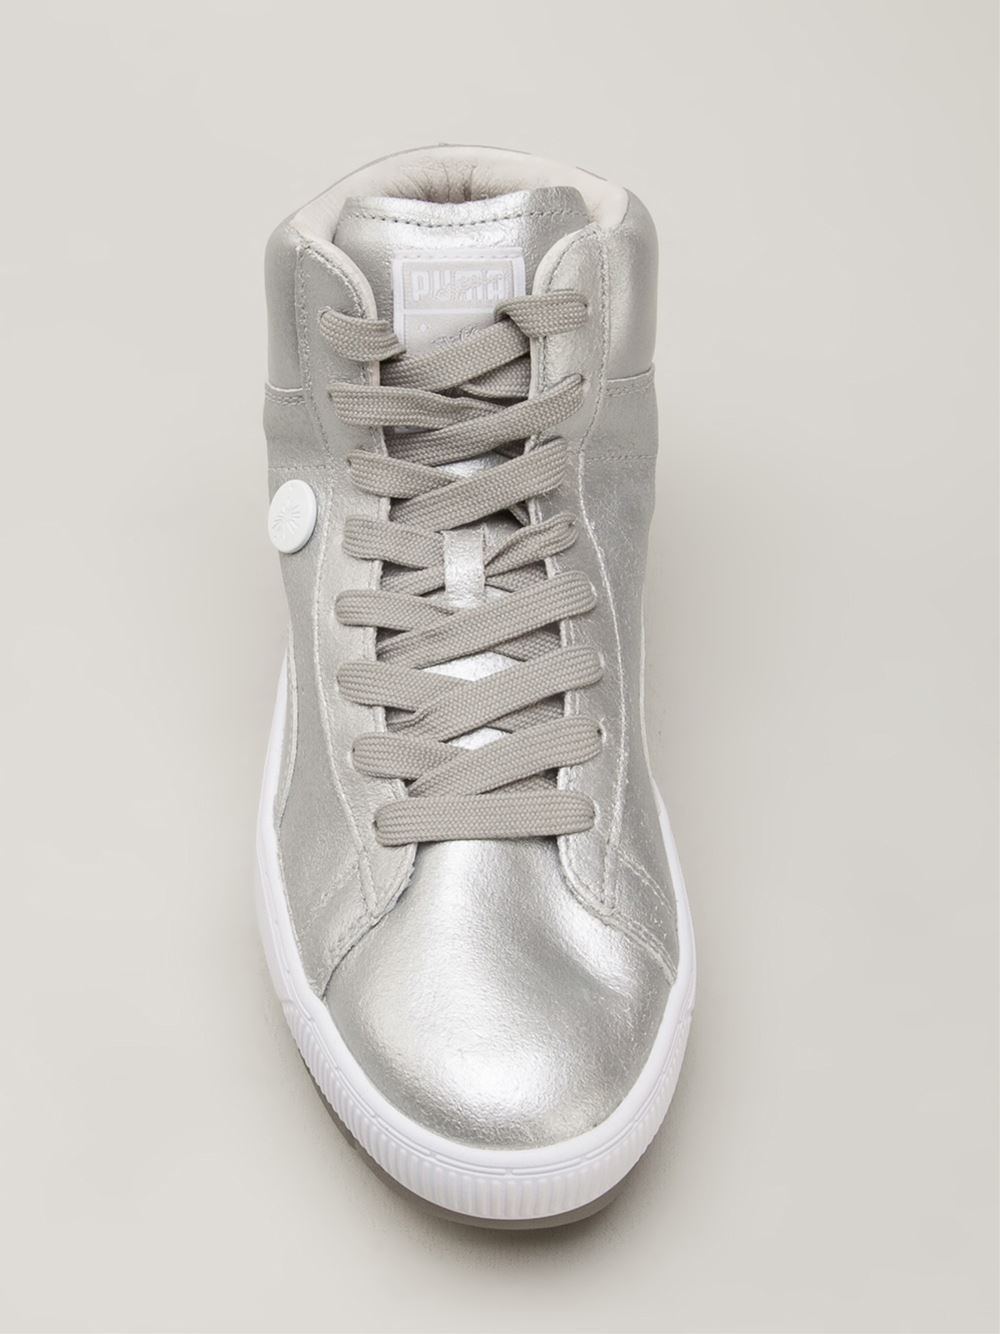 silver high tops